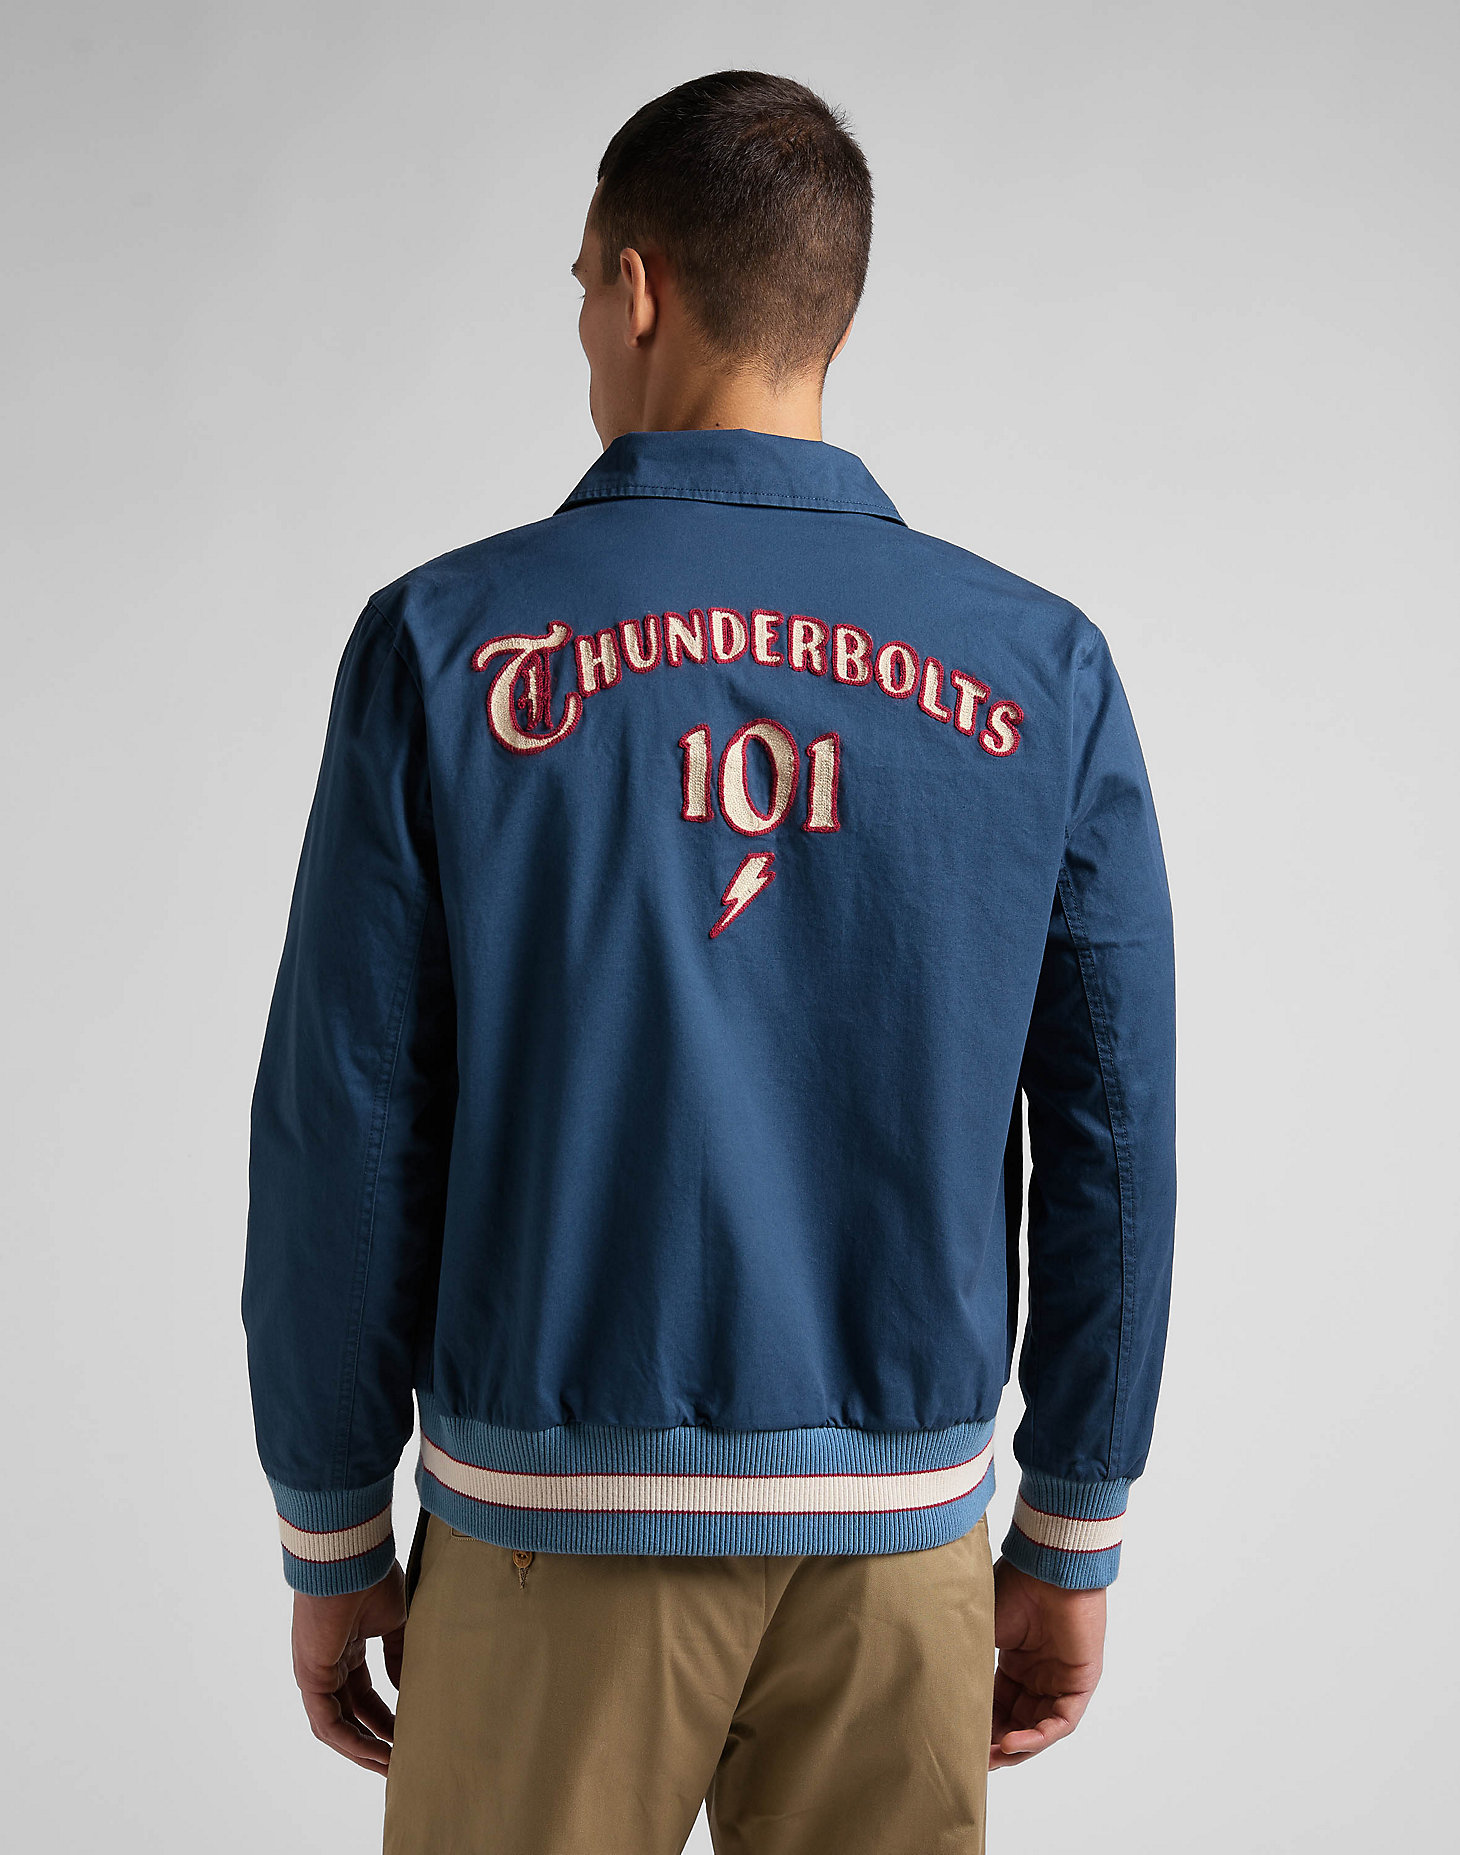 101 Bomber Jacket in Ensign Blue alternative view 2